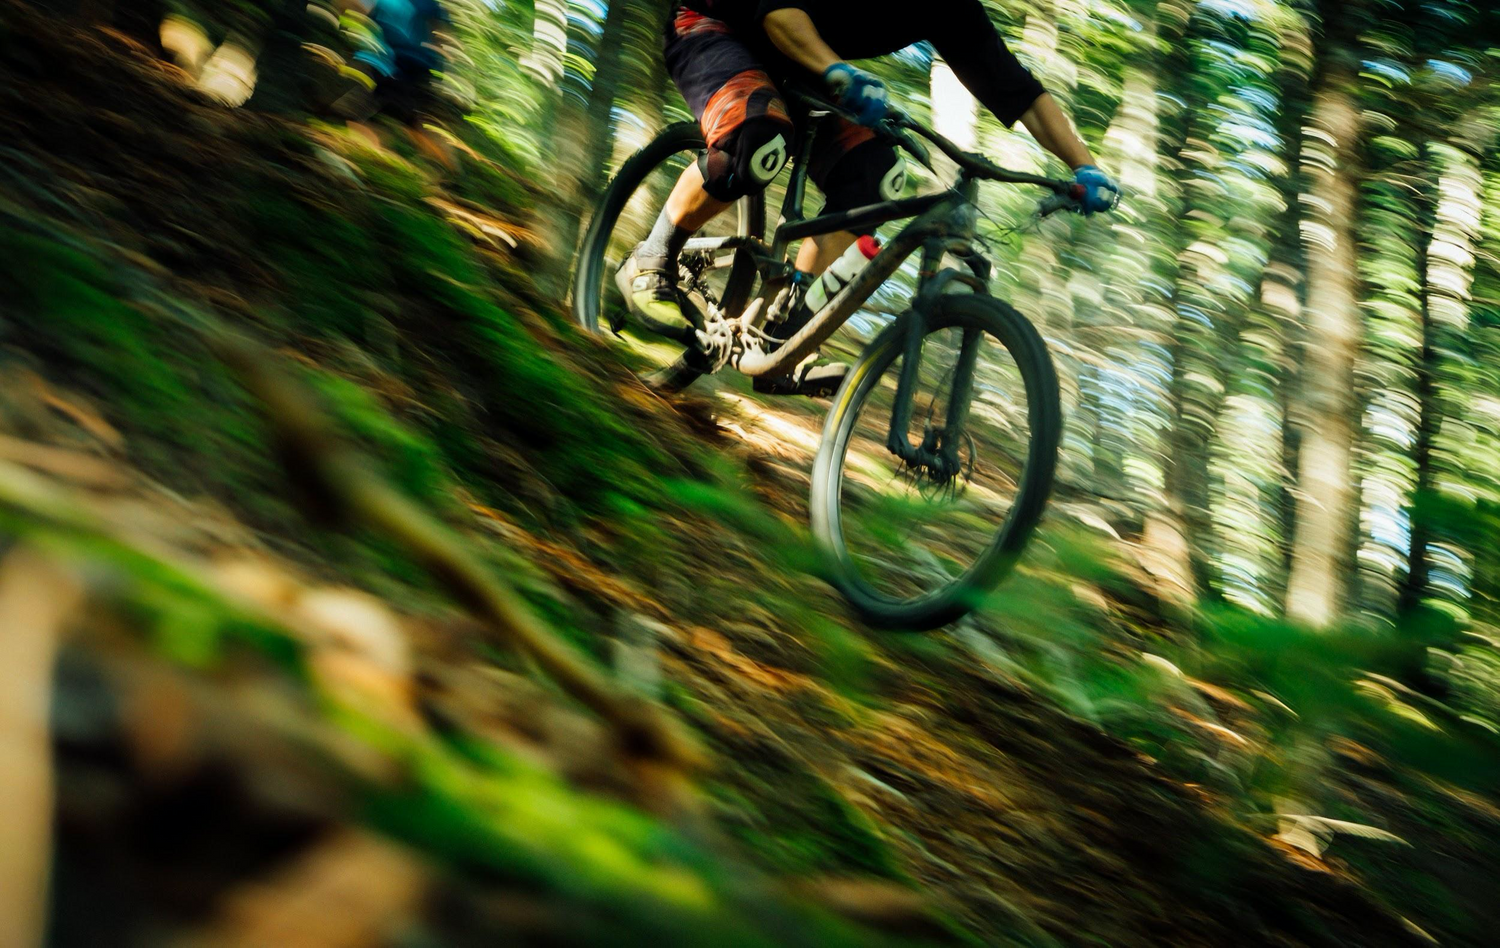 The Downieville Downhill course drops more than 5,000 vertical feet over 15 miles. 